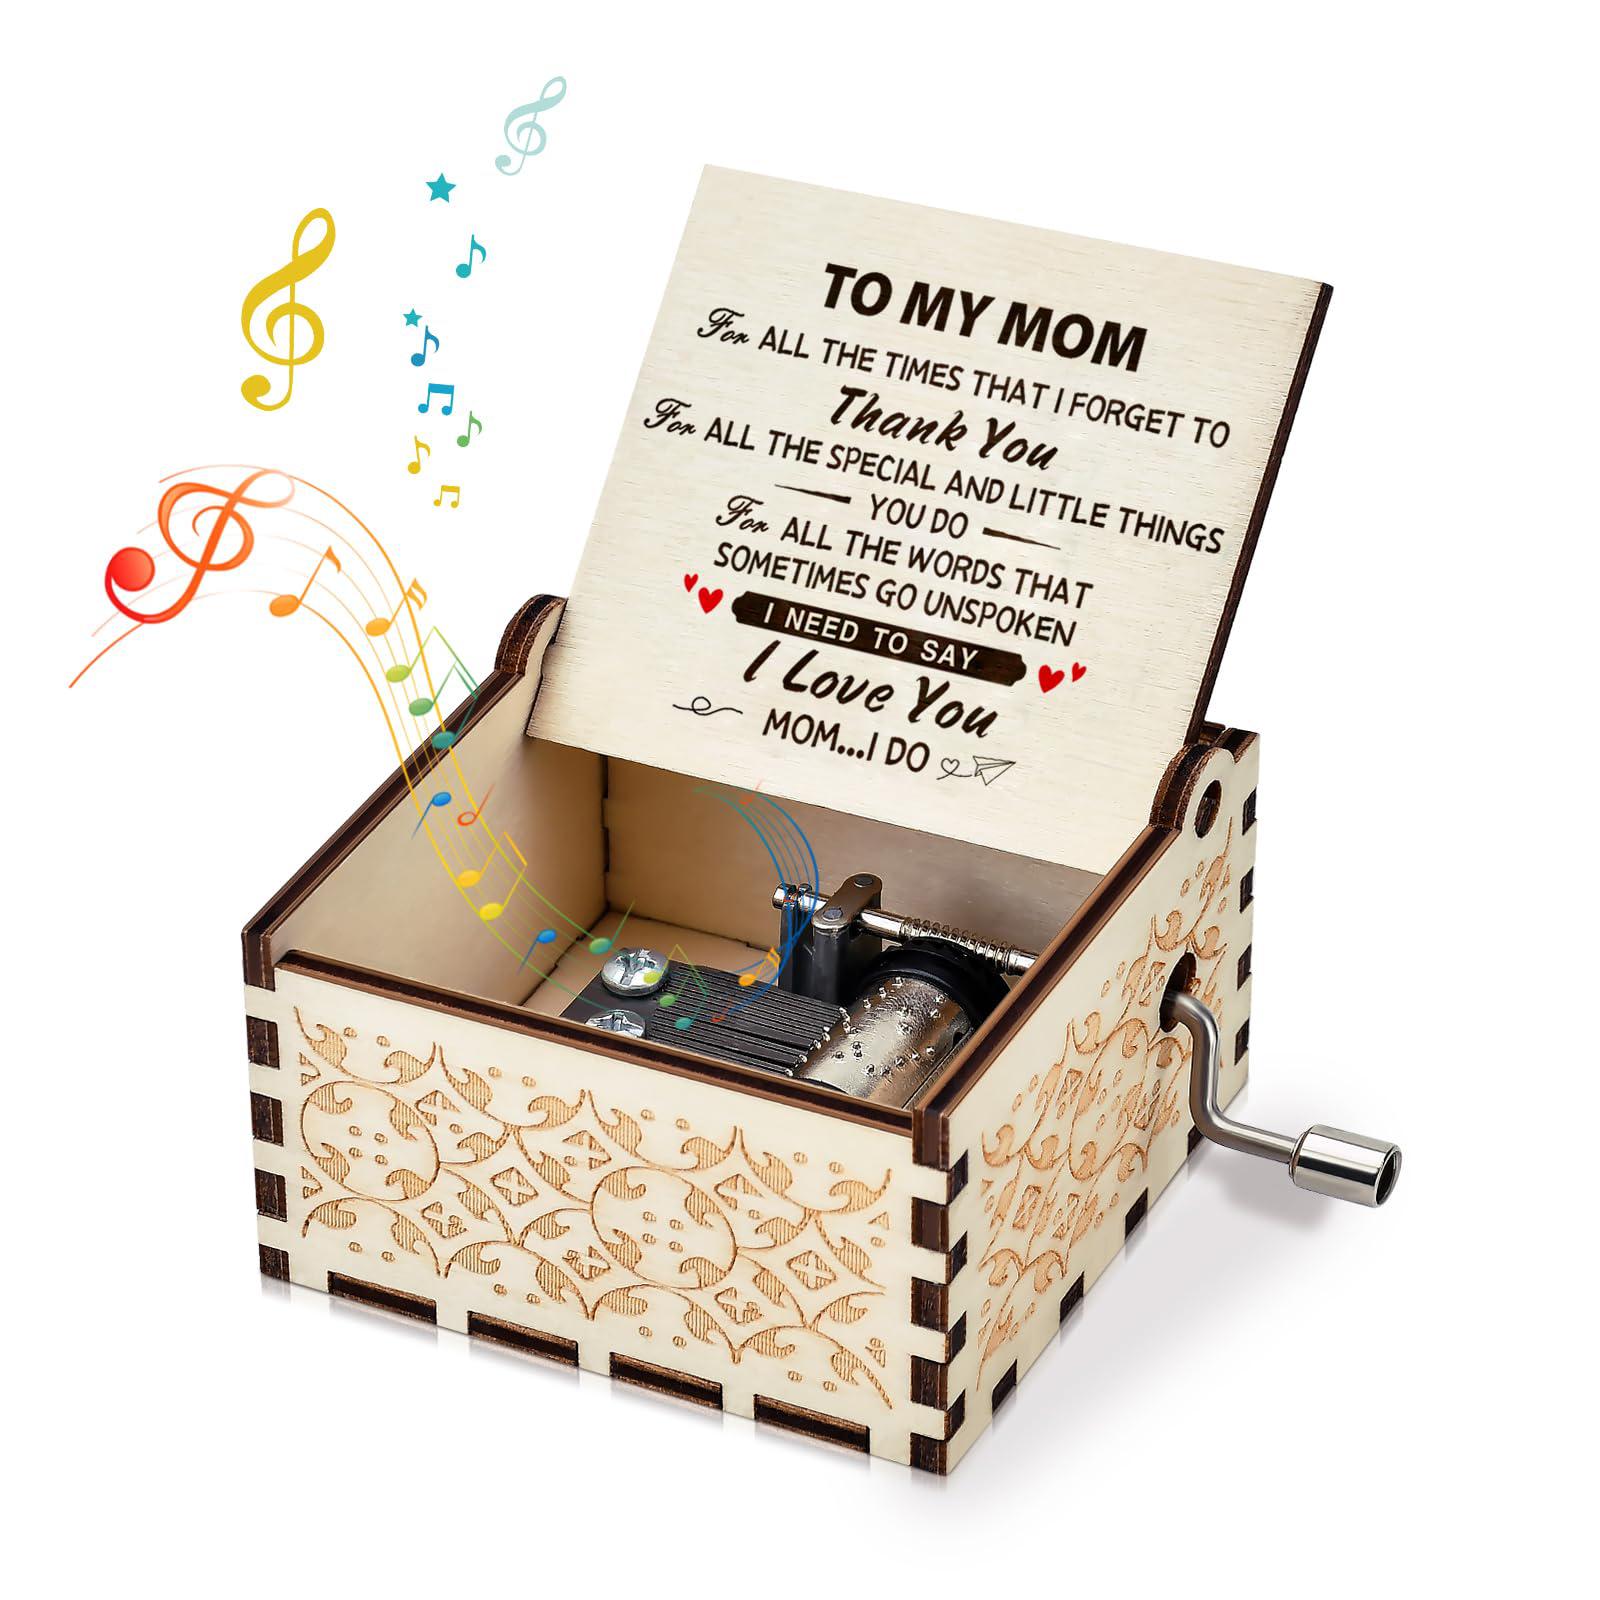 Likeny birthday gifts for mom wooden musical box gifts for mom